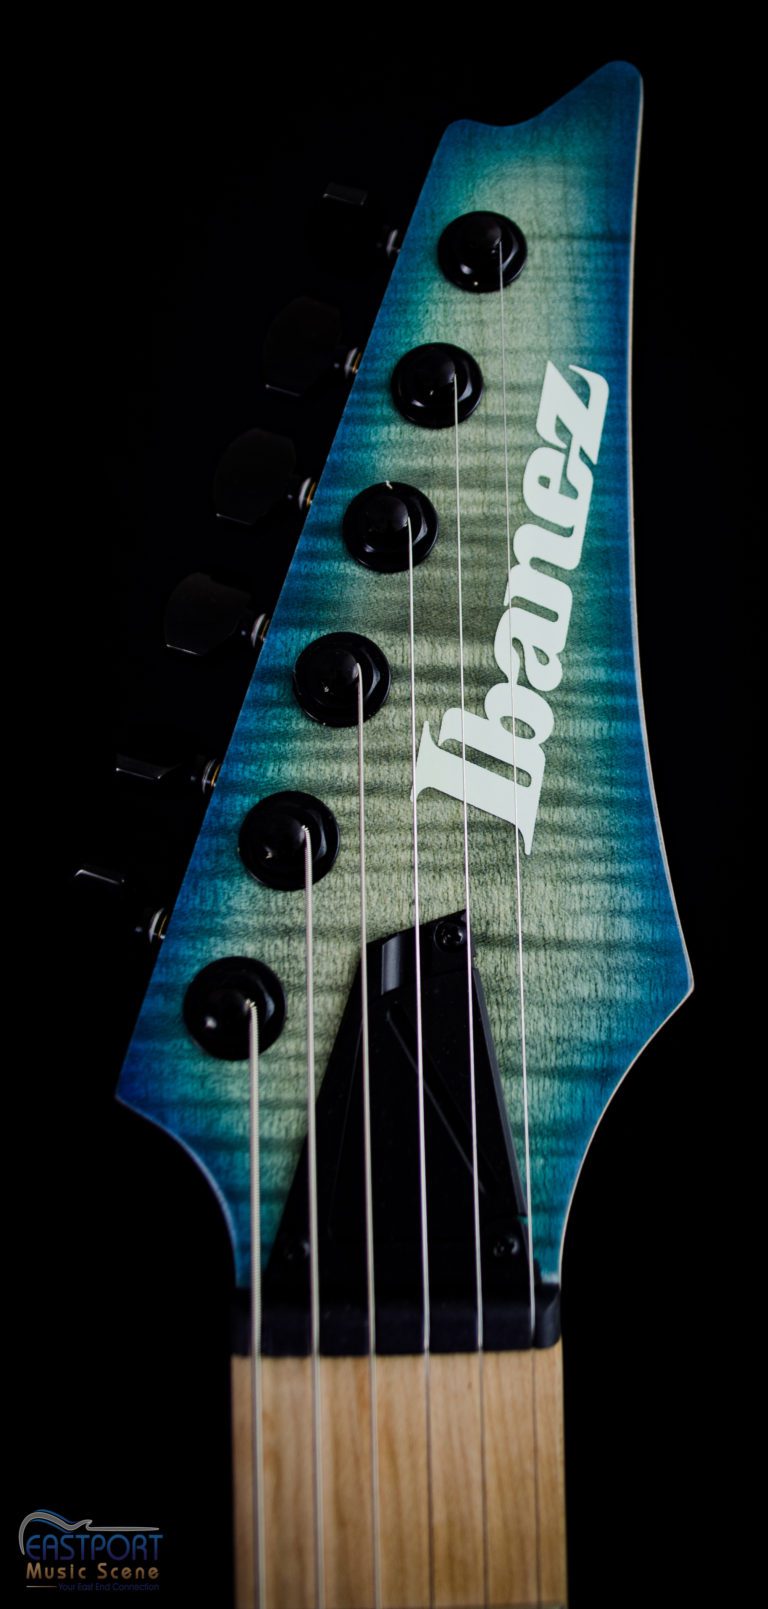 A close up of the neck and headstock of an ibanez guitar.